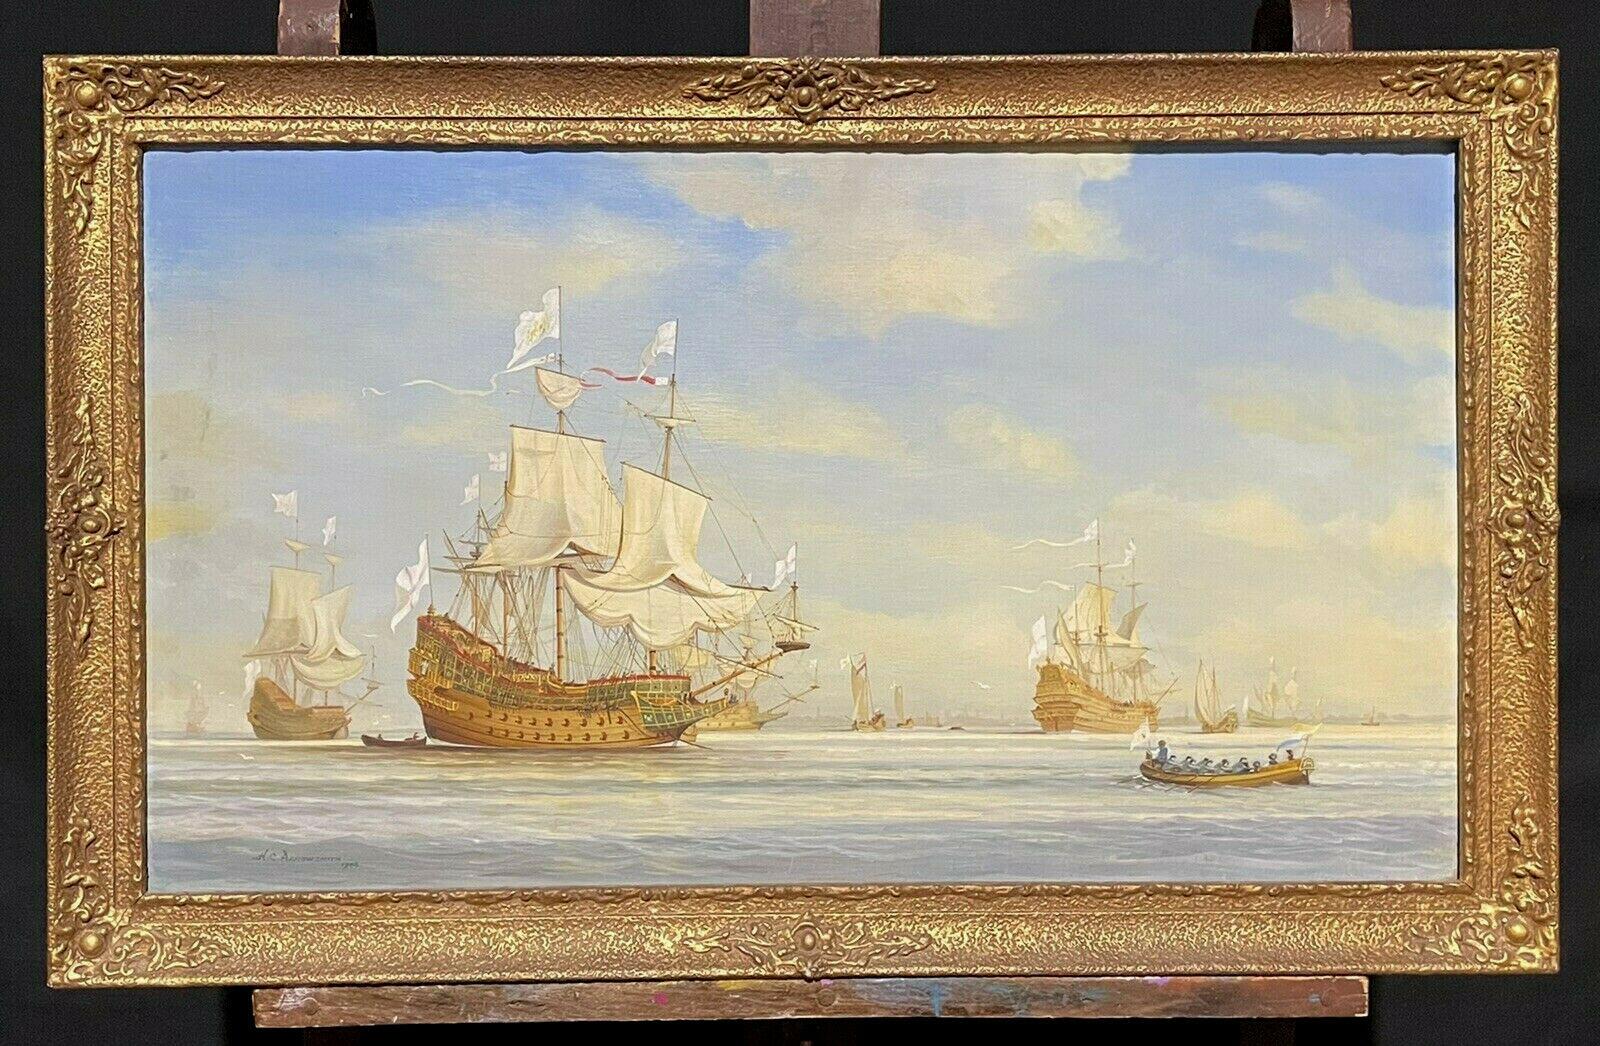 LARGE BRITISH HISTORICAL MARITIME OIL PAINTING - 17TH CENTURY SHIPS AT SEA - Painting by H. C. Arrowsmith